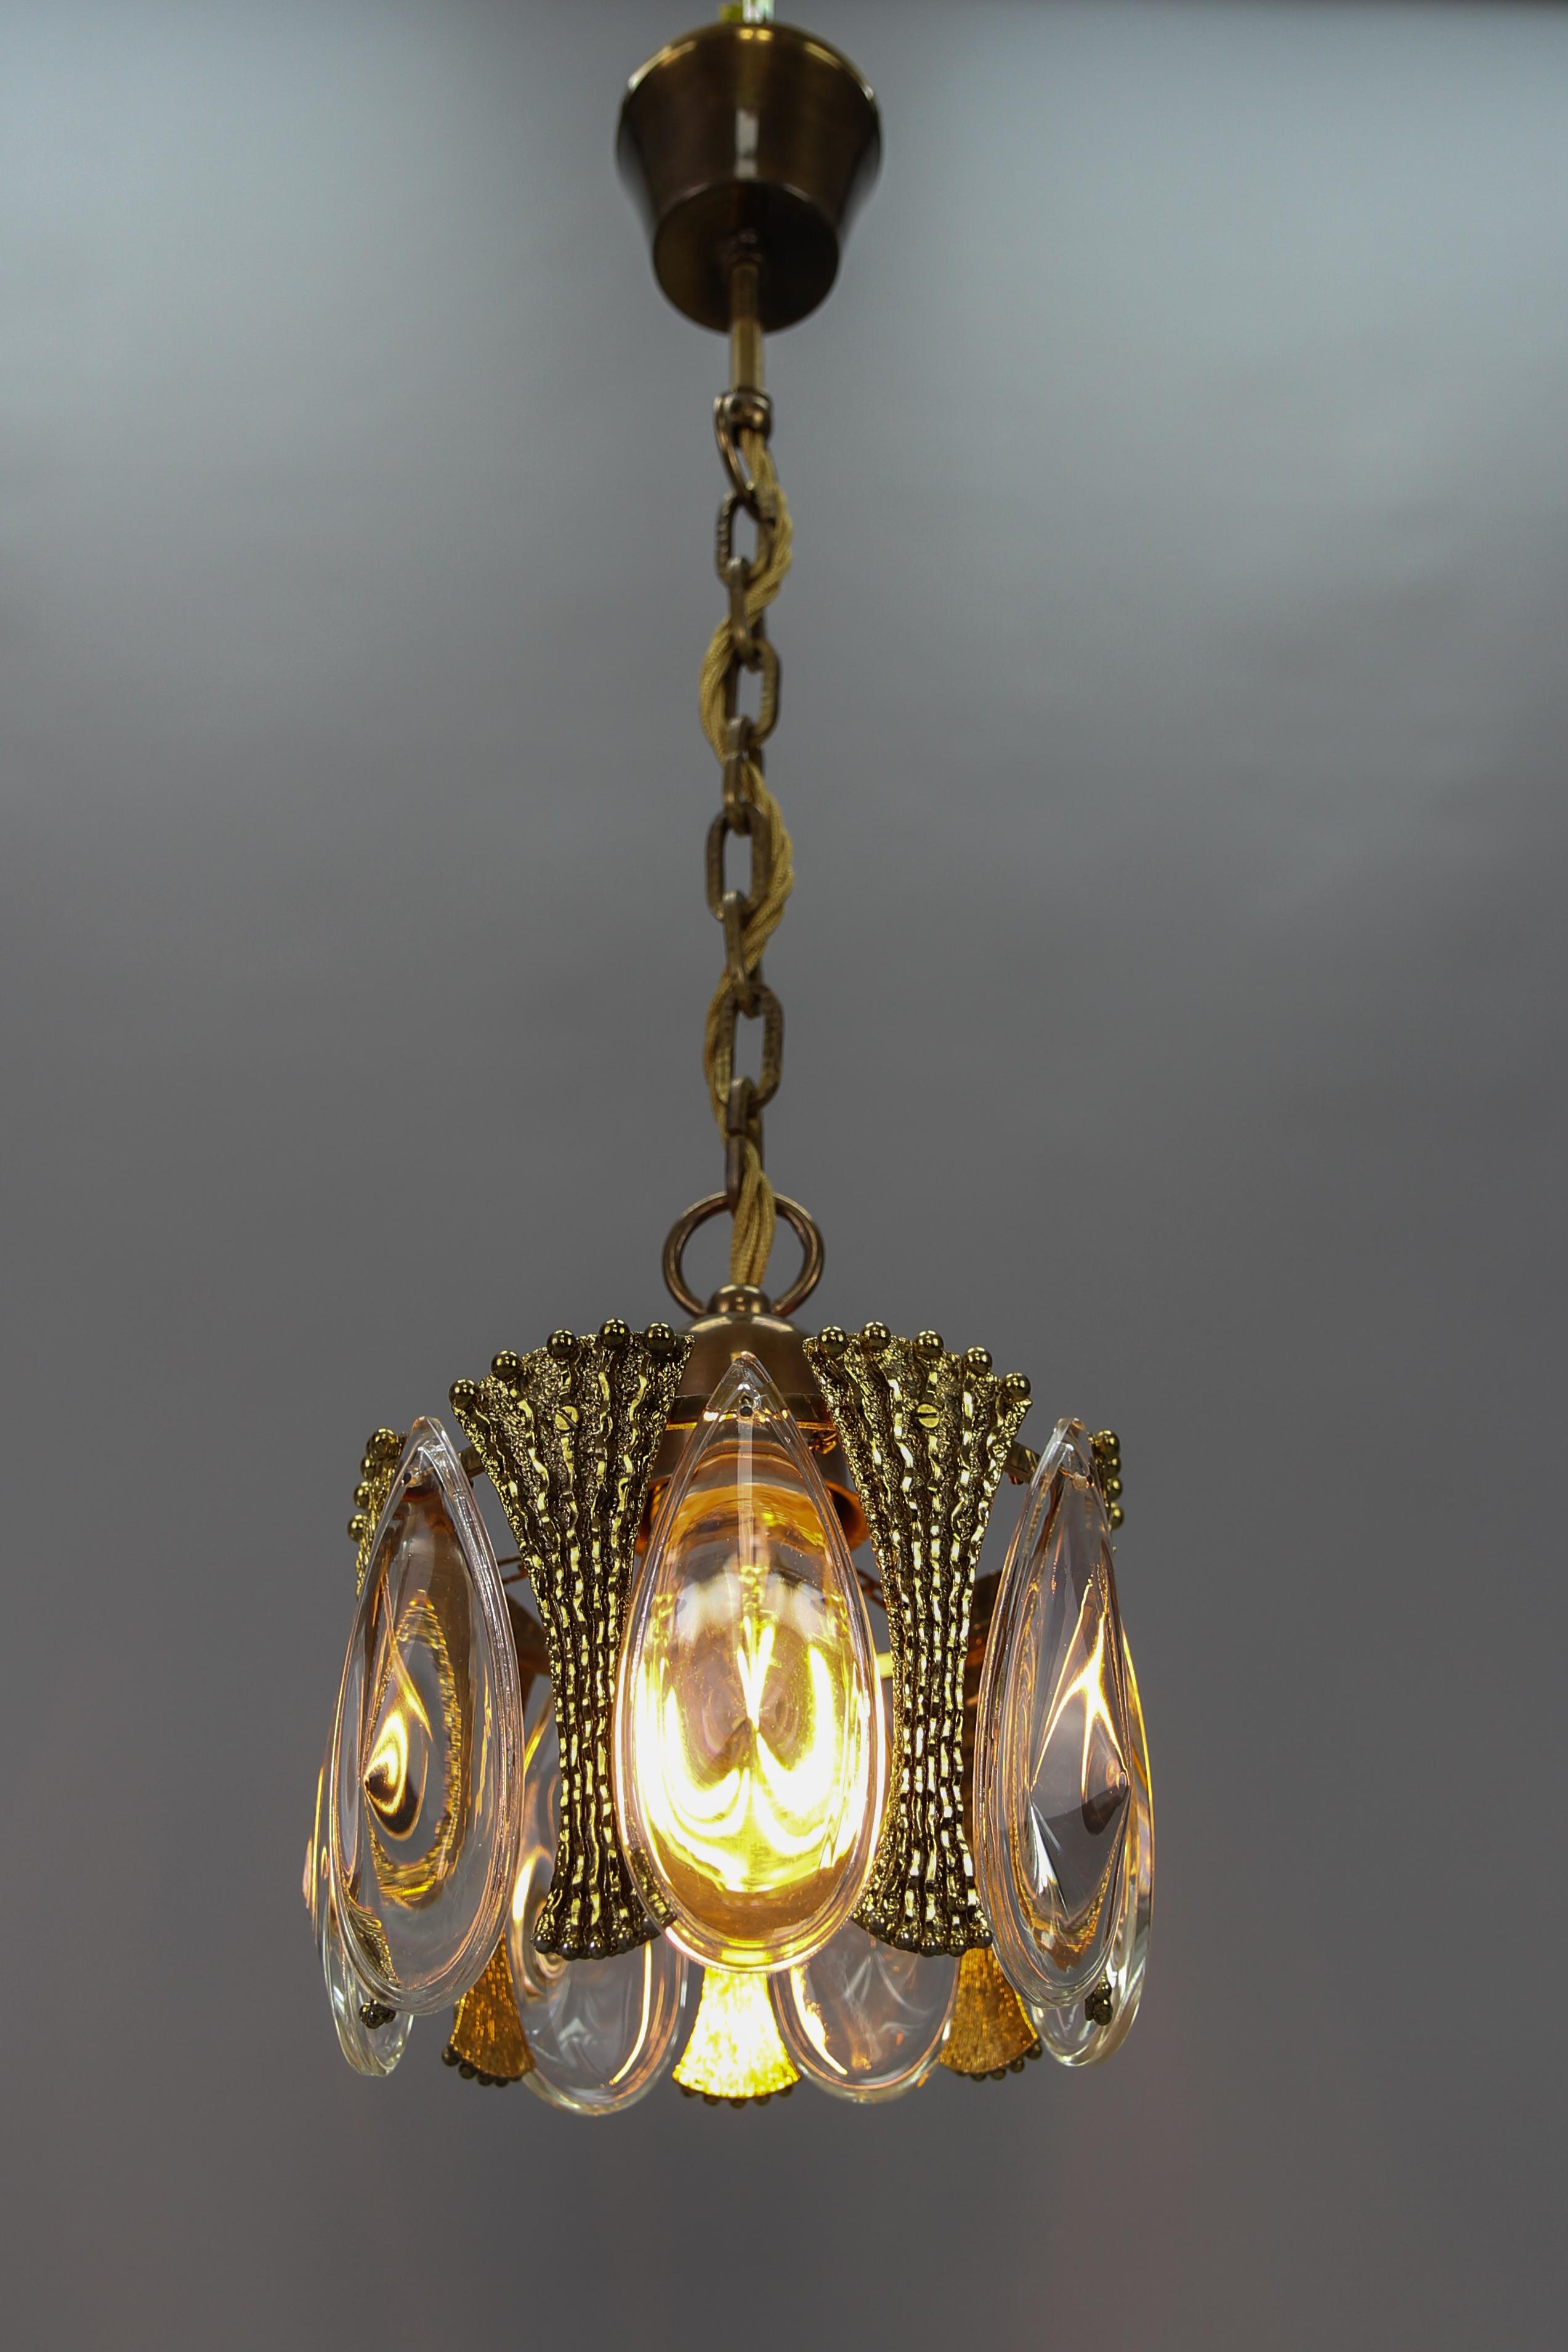 Midcentury single-light brass and glass pendant light fixture, Germany, circa the 1970s.
An adorable and compact pendant light fixture decorated with beautiful brass details and oval teardrop-shaped glass pendants.
One socket for E27 (E26) size